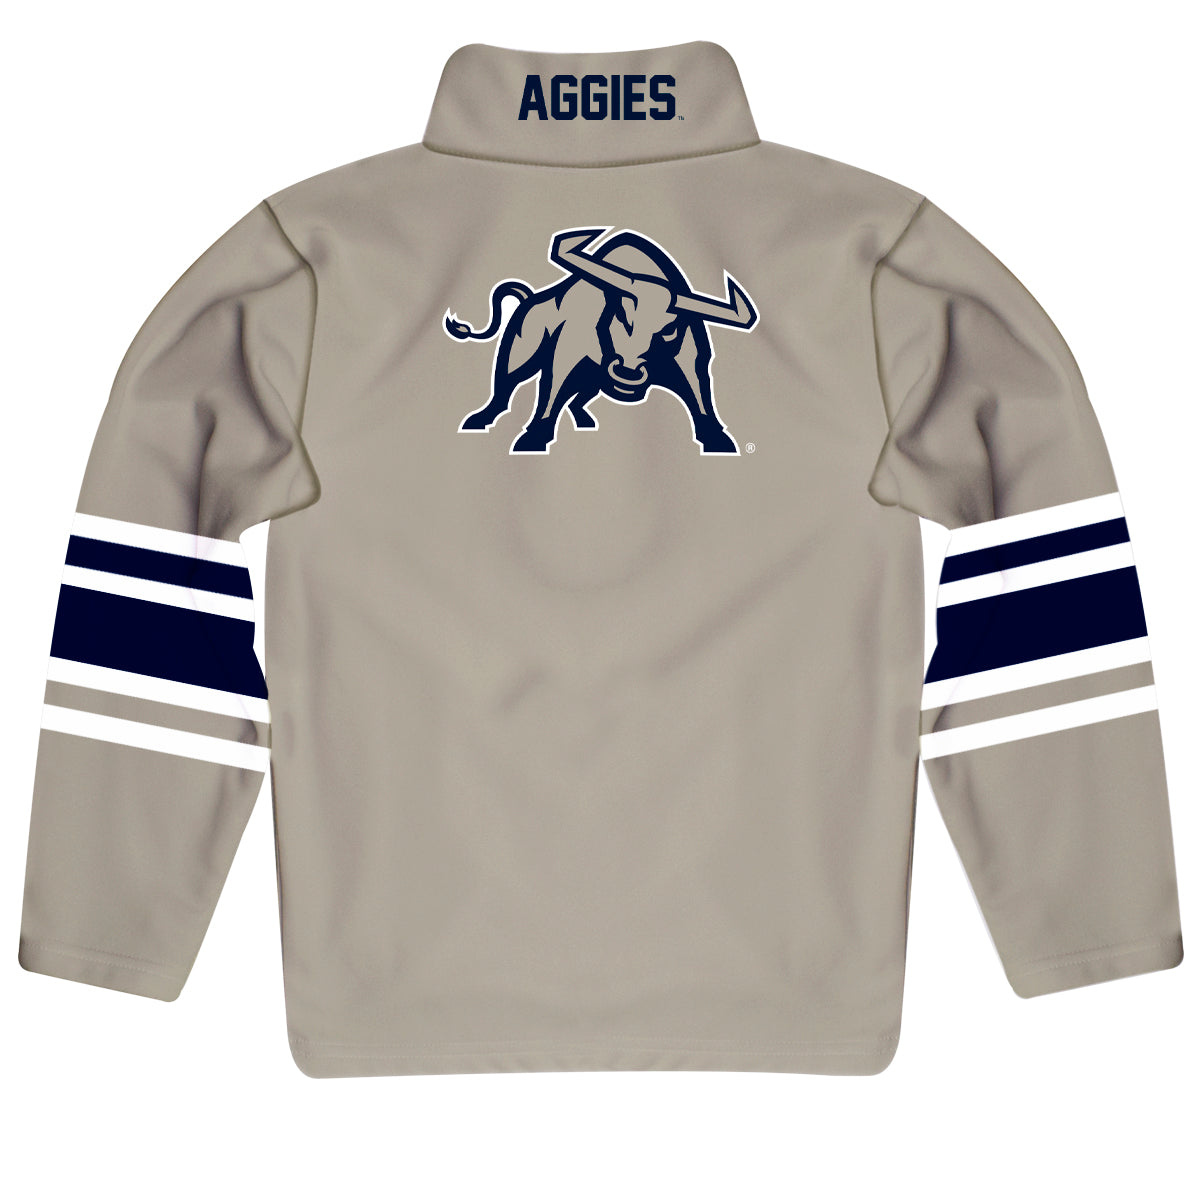 Utah State Aggies Game Day Gray Quarter Zip Pullover for Infants Toddlers by Vive La Fete